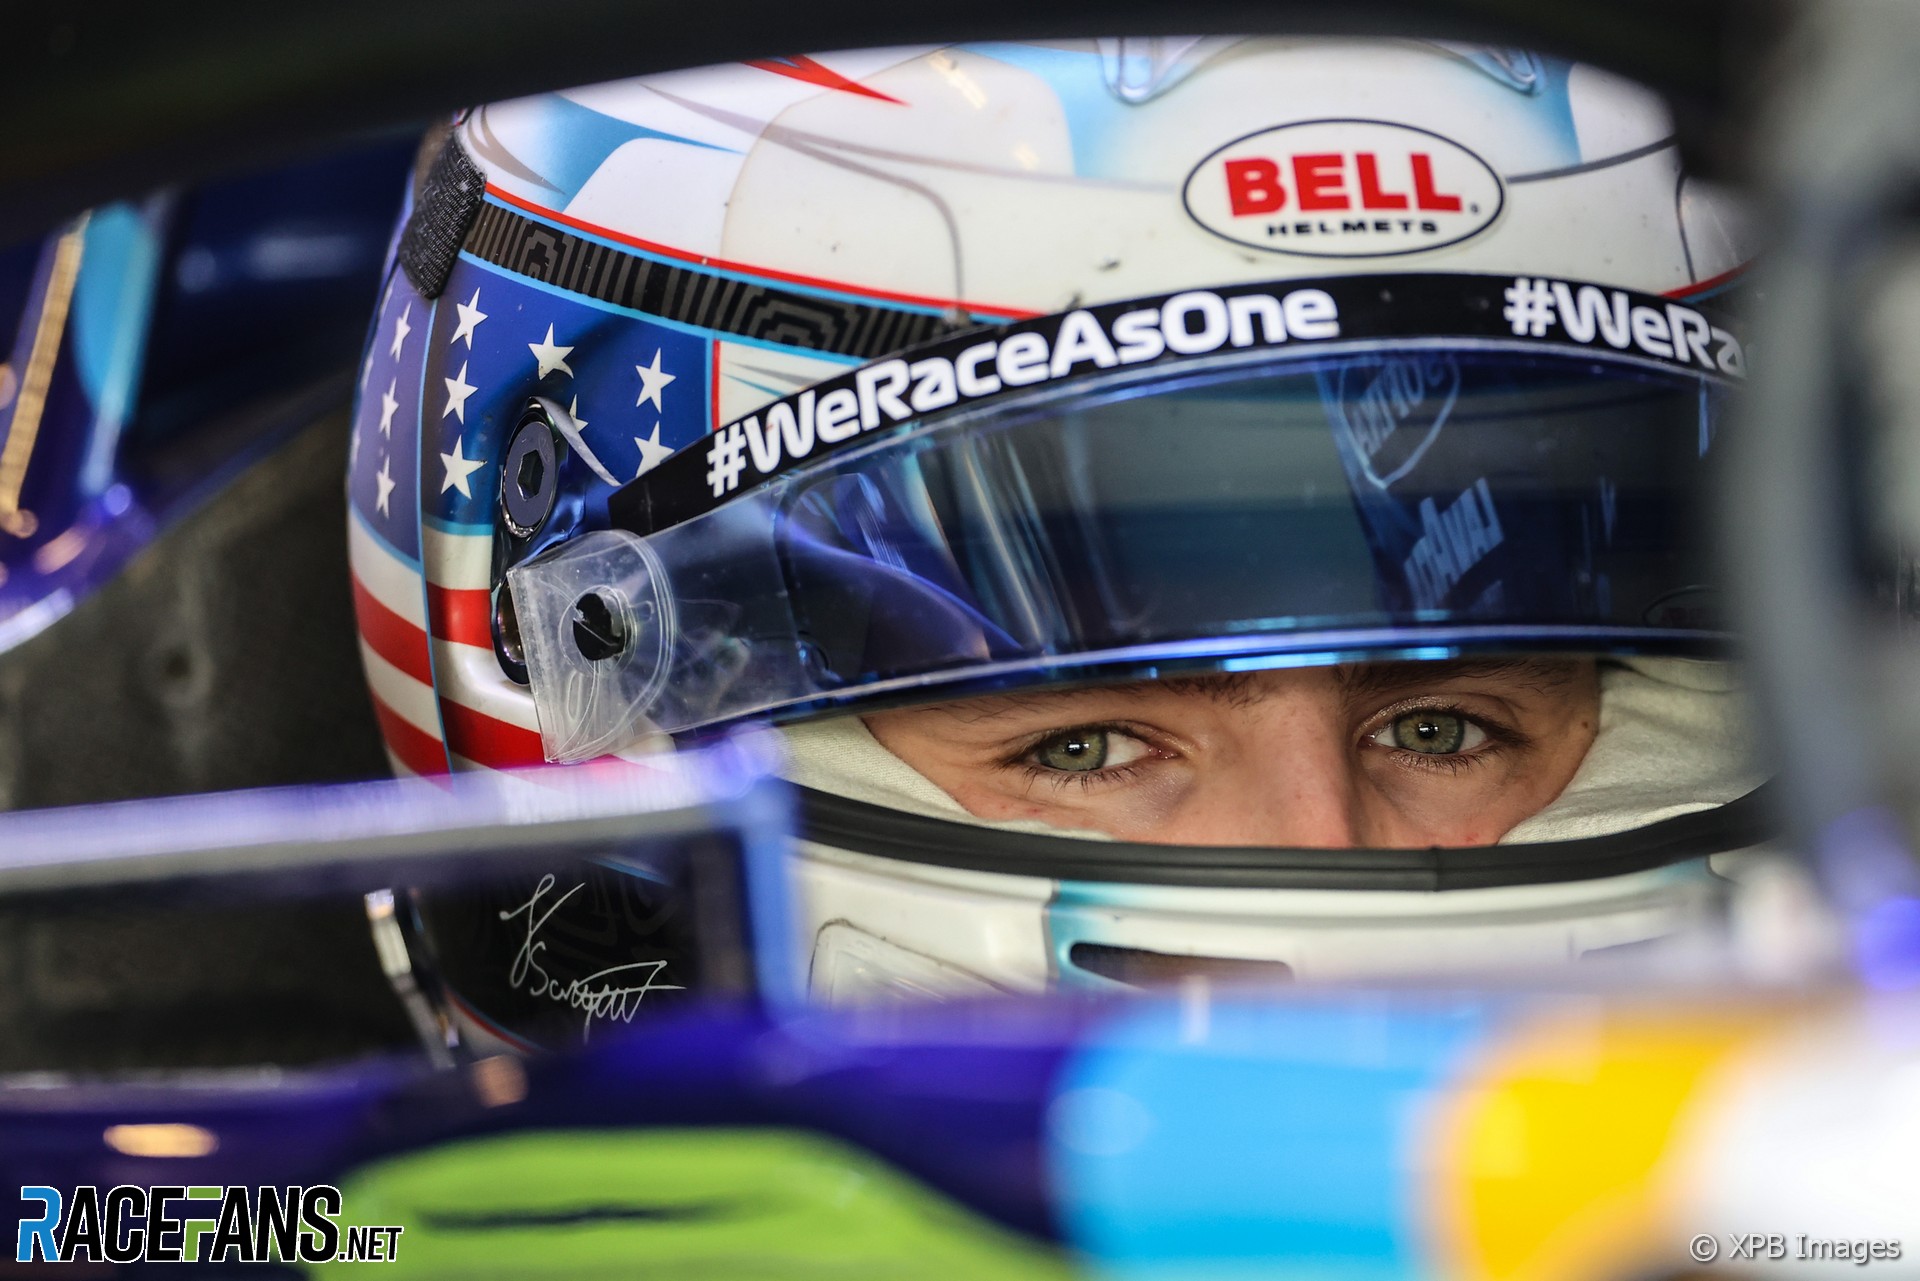 “We’re right on the on the cusp of a big result”: Q&A with Williams junior Logan Sargeant | 2022 F1 season